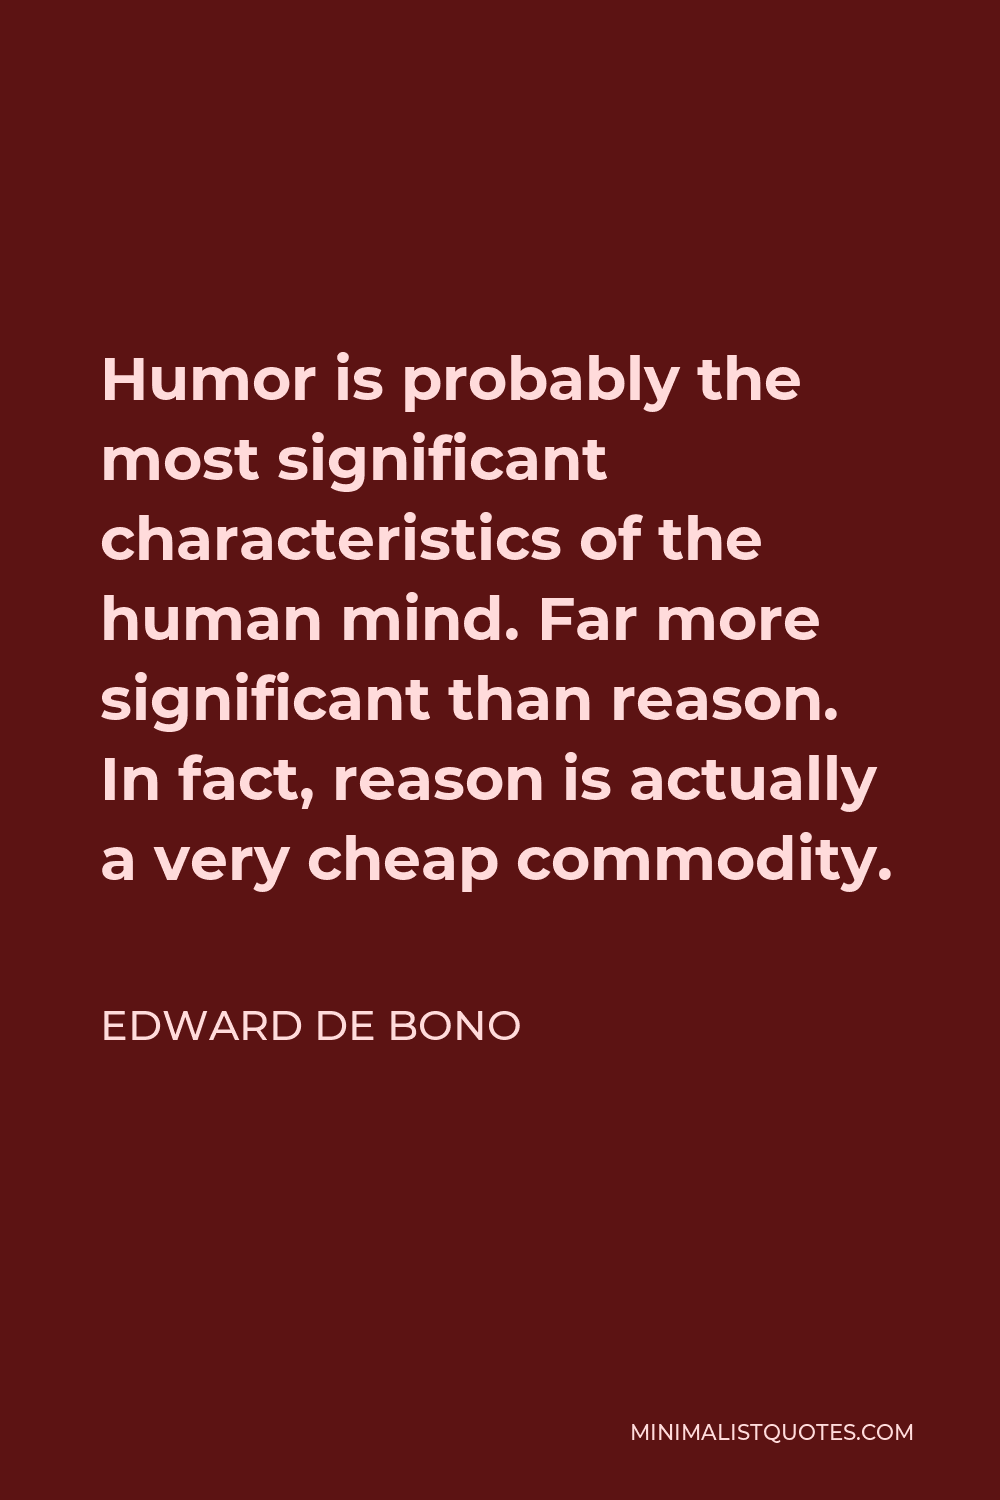 Edward de Bono Quote - Humor is probably the most significant characteristics of the human mind. Far more significant than reason. In fact, reason is actually a very cheap commodity.